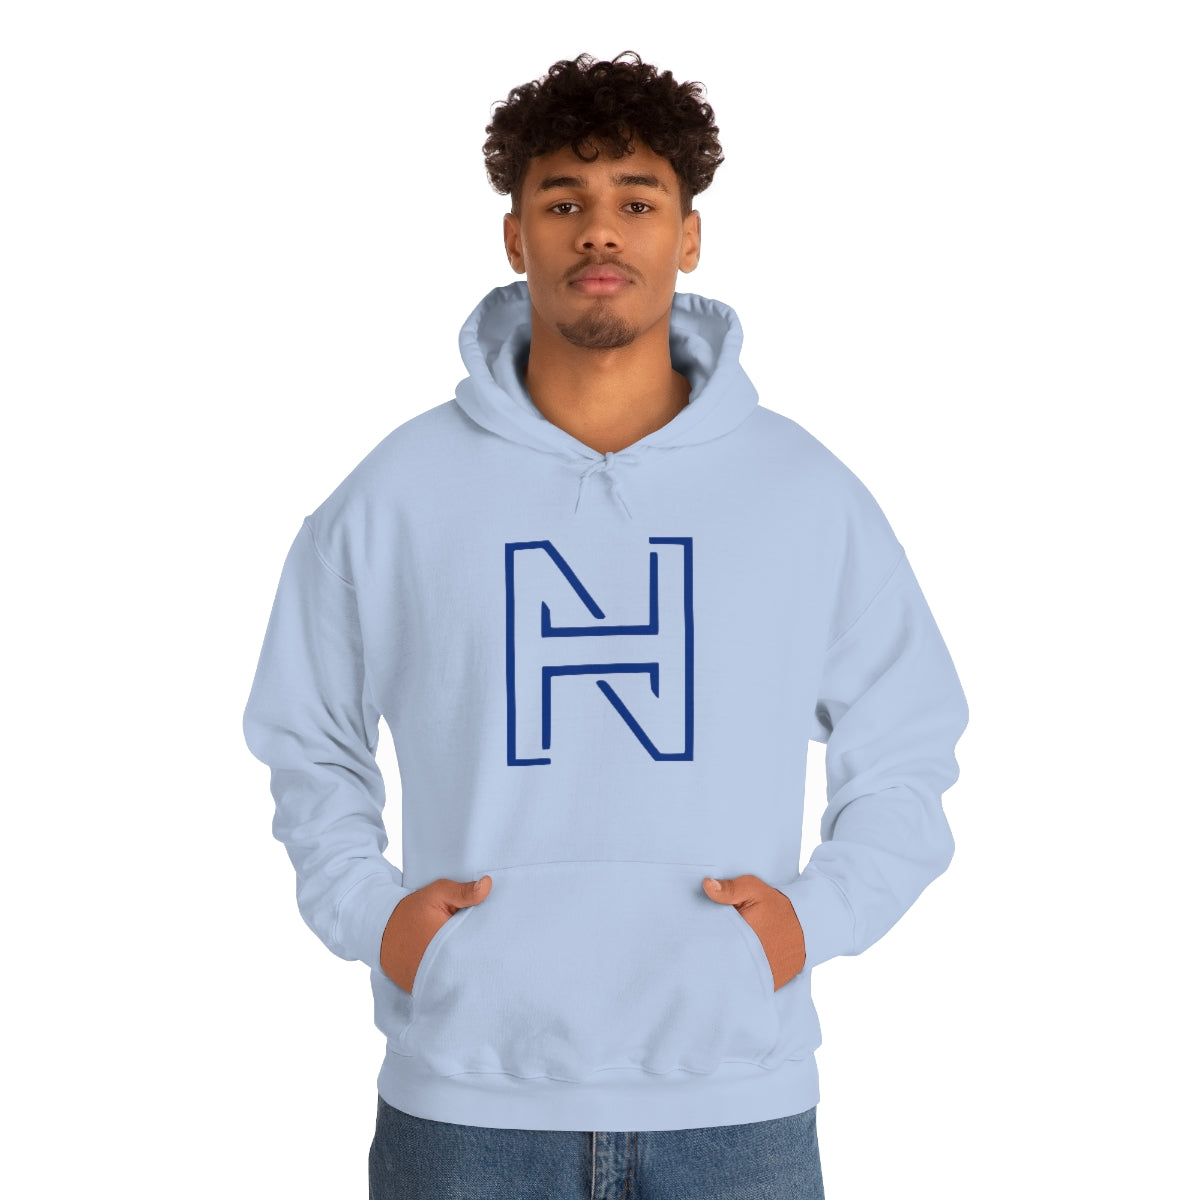 NILE HILL DOUBLE-SIDED HOODIE